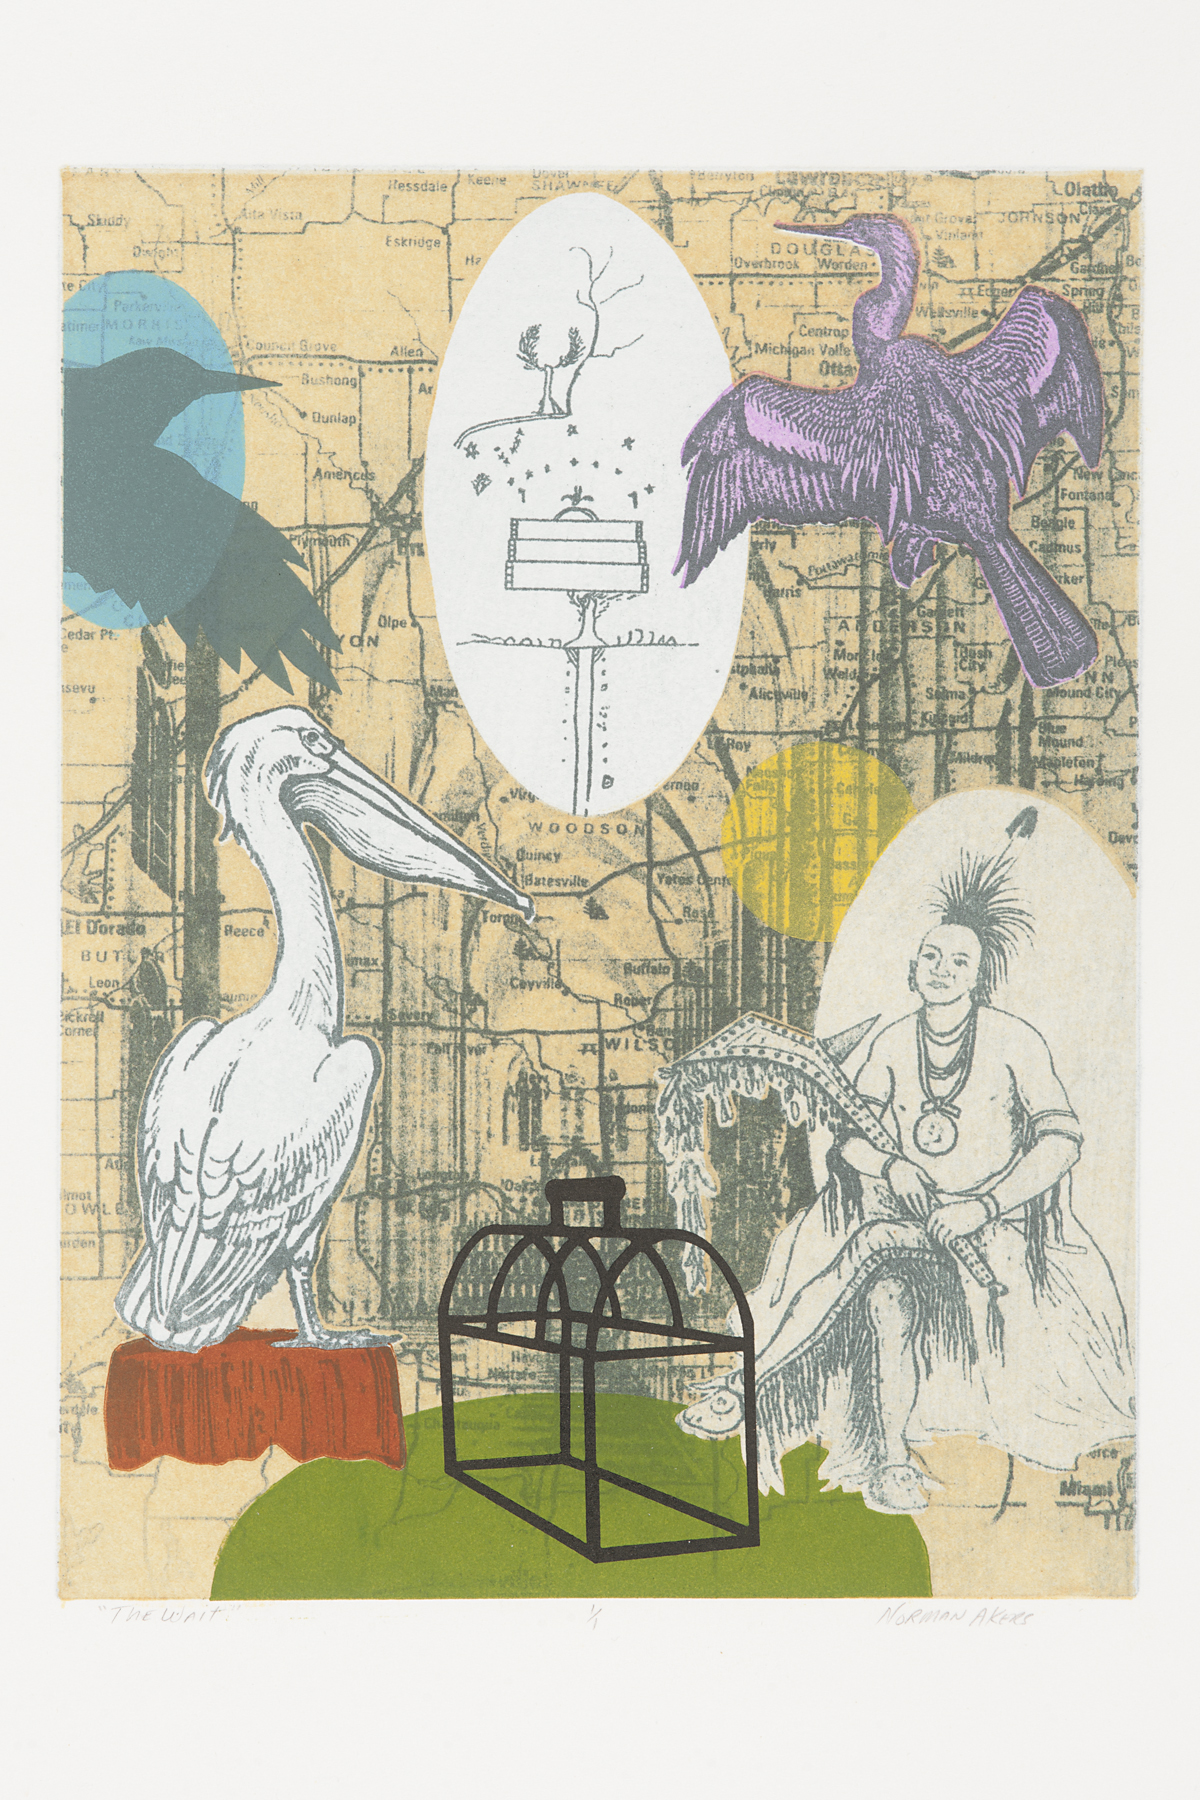 Pelican, Cormorant, and silhouettes of flying swallow-like birds at BL corner and top half of image. The LR quadrant of the work is occupied by a seated figure wearing fringed leggings and a roach-type headdress, holding a studded rifle or mace (This figure is derived from an 1834 watercolor of the Osage Chief Glahmo, also known as Clermont, by George Catlin, now in the collection of the Missouri History Museum). To the left of the figure is a linear, lunchbox form.